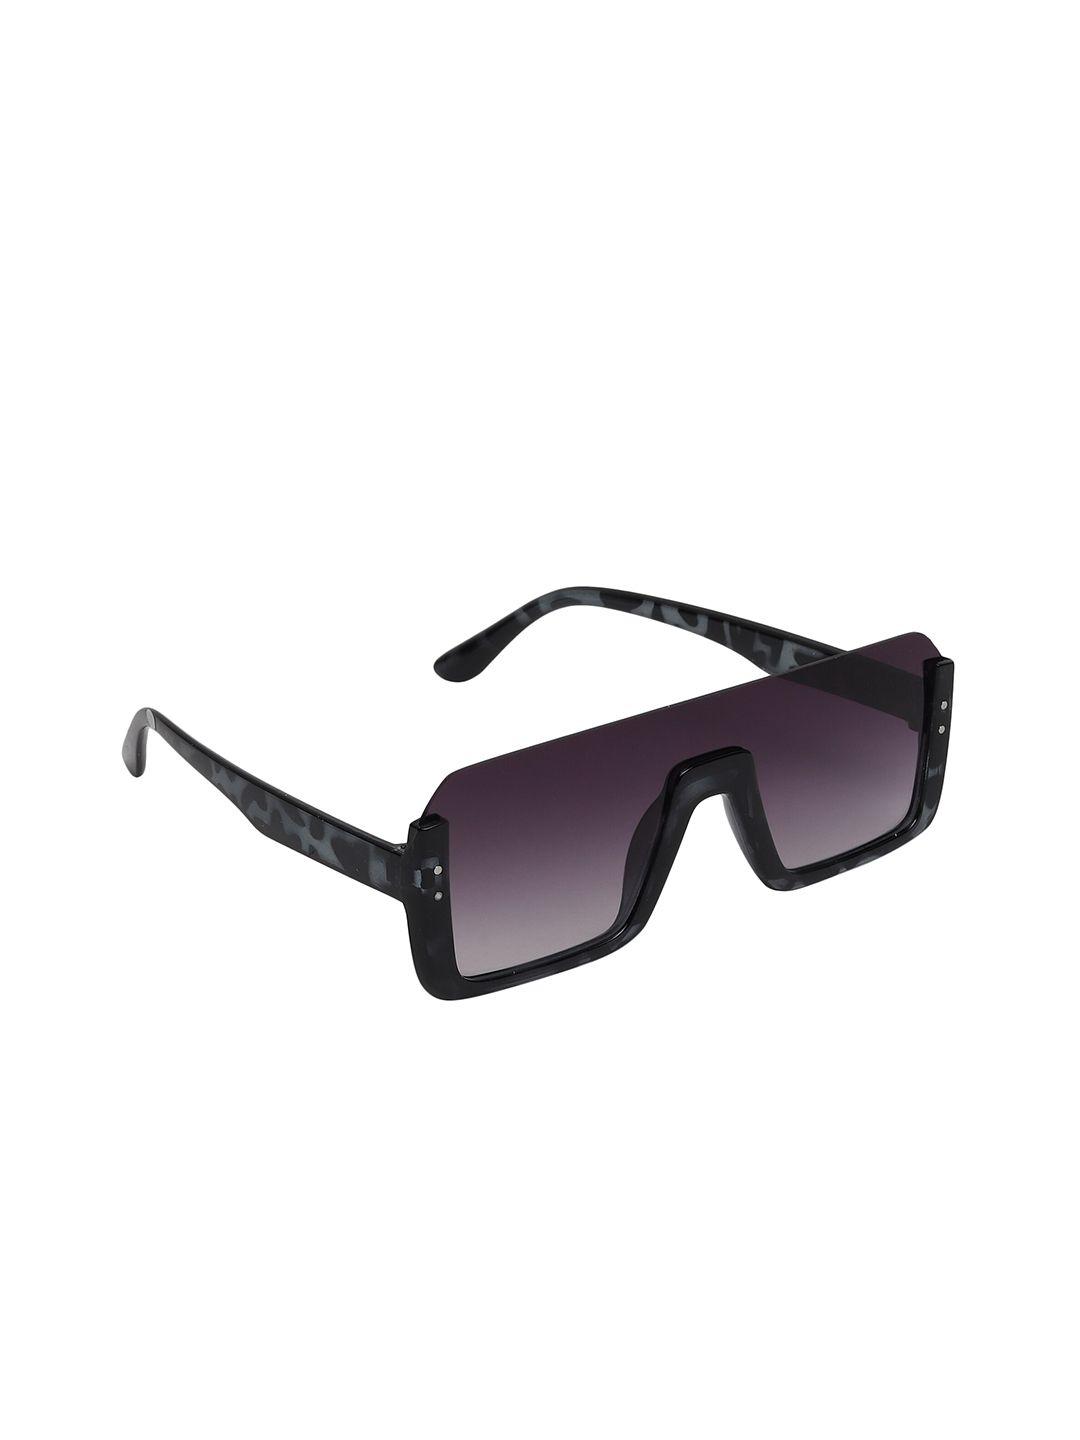 celebrity sunglasses unisex purple lens & brown browline sunglasses with uv protected lens